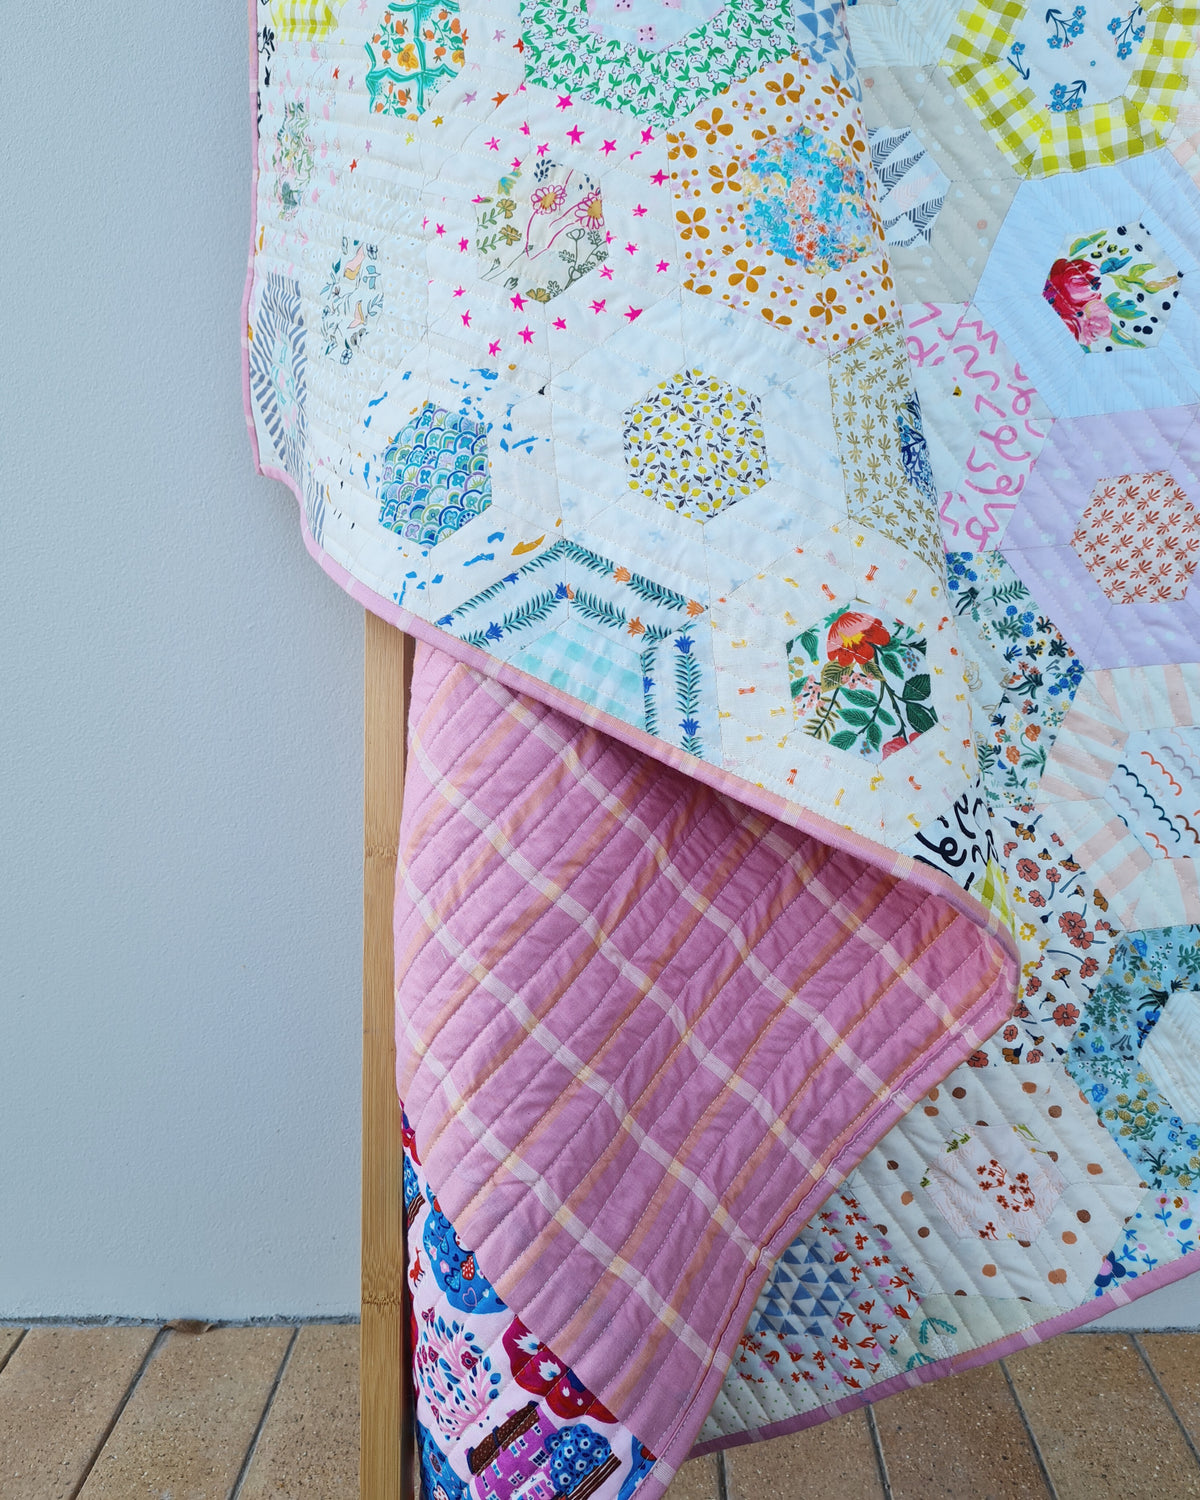 Rosemallow EPP Quilt in Low Volume: An Easy EPP Quilt – Tales of Cloth